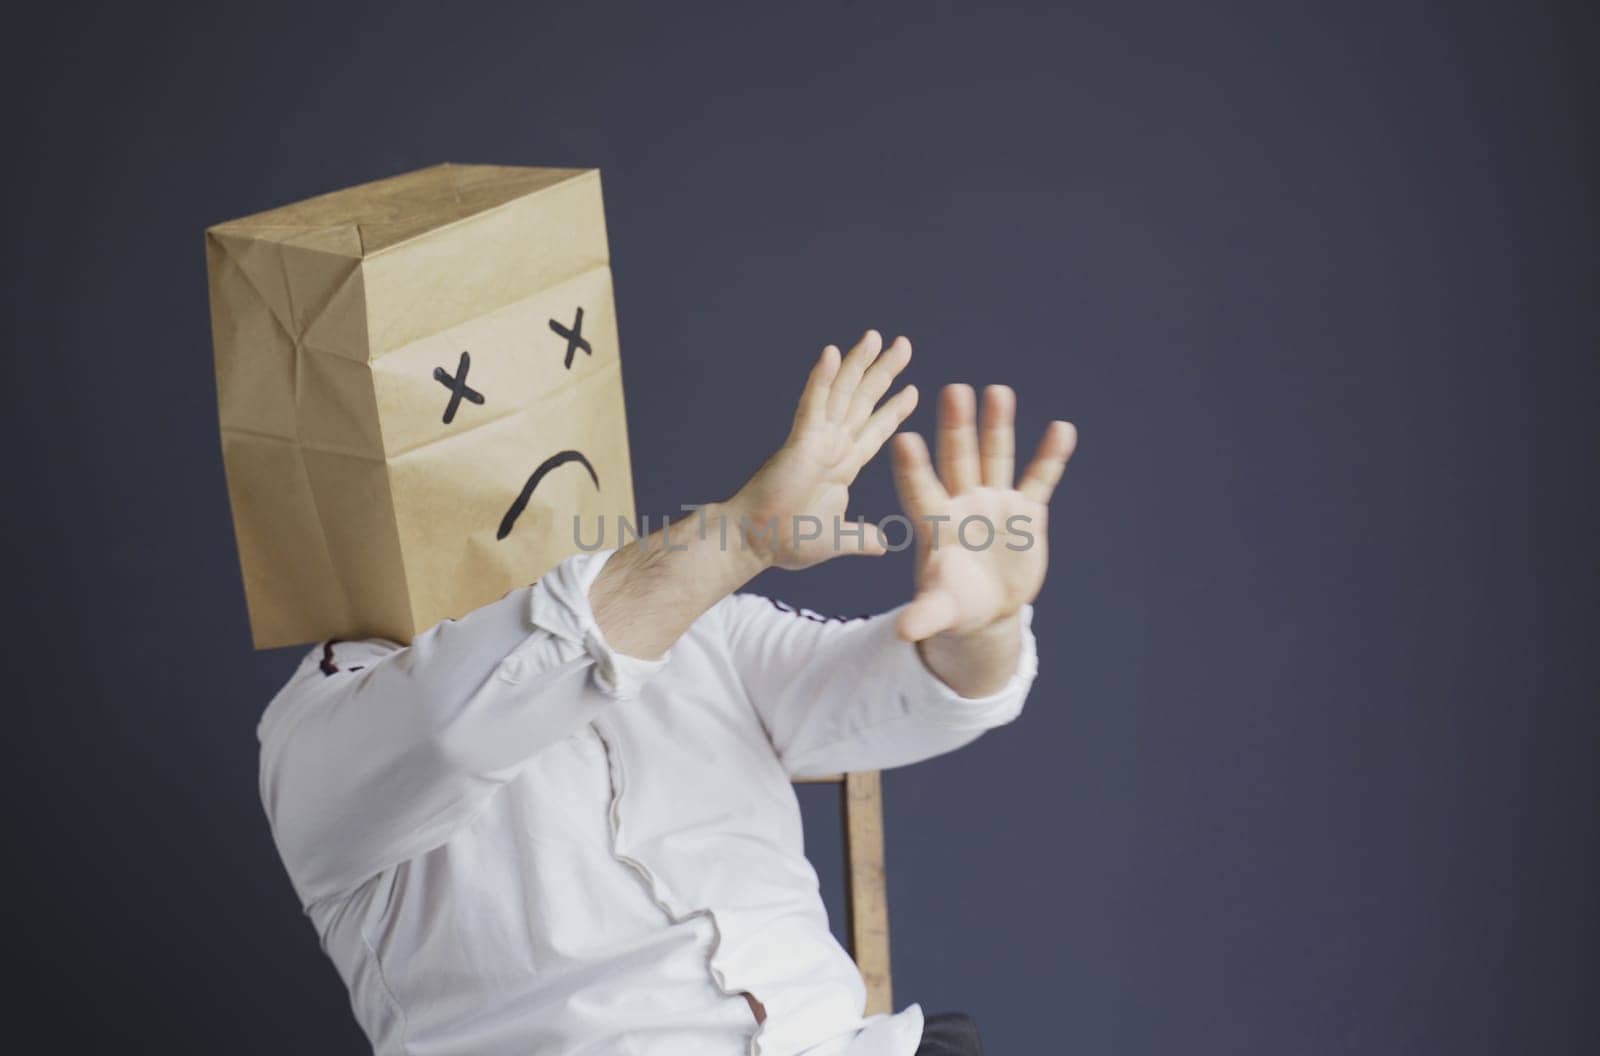 A sad man in a white shirt with a bag on his head, with a sad emoticon drawn, is afraid, defends himself by putting his hands forward. Emotions and gestures.